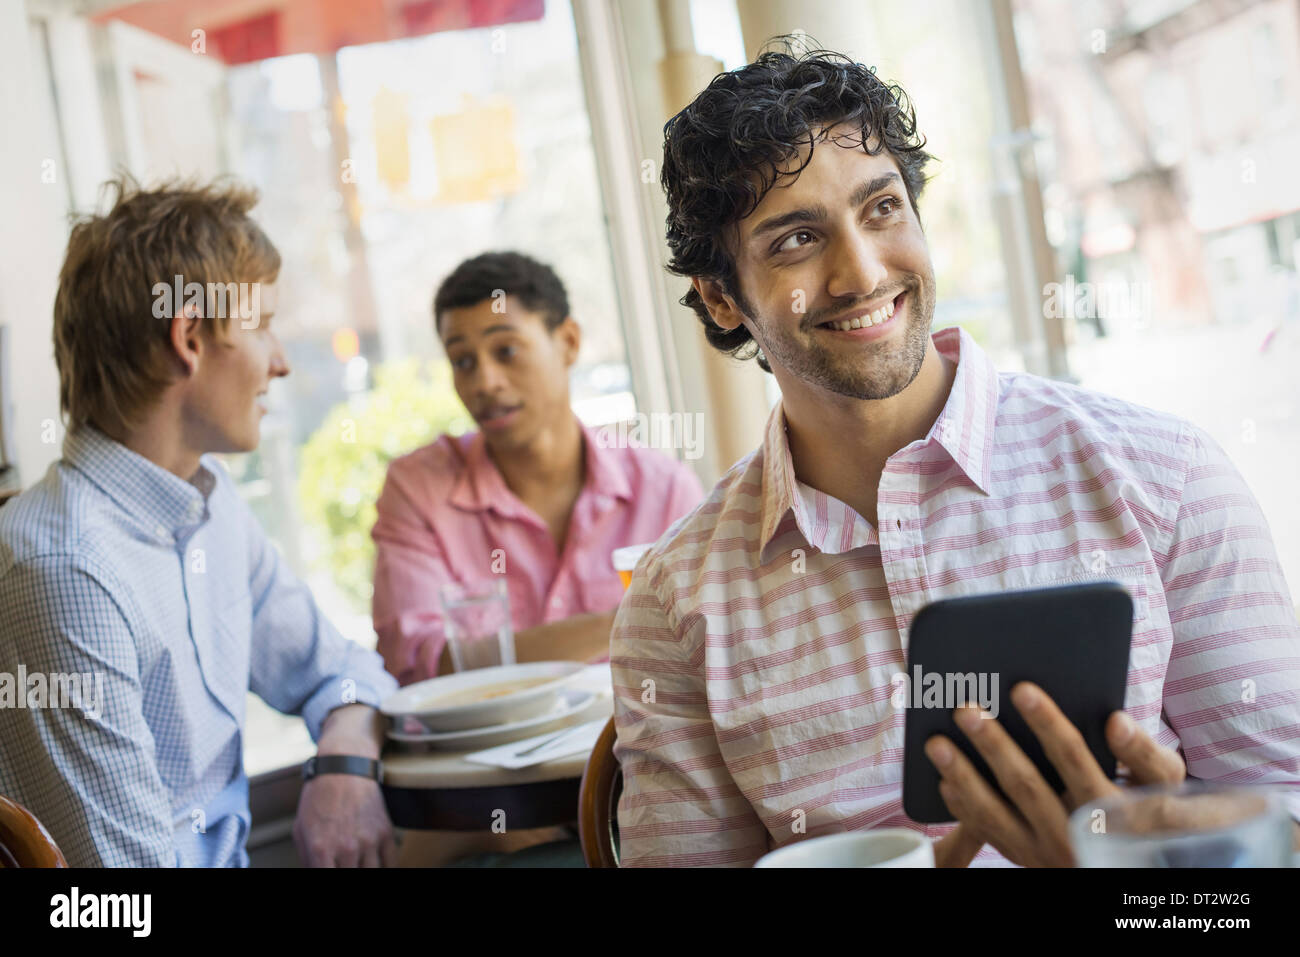 Urban Lifestyle Three young men around a table in a cafe One holding a digital tablet Stock Photo